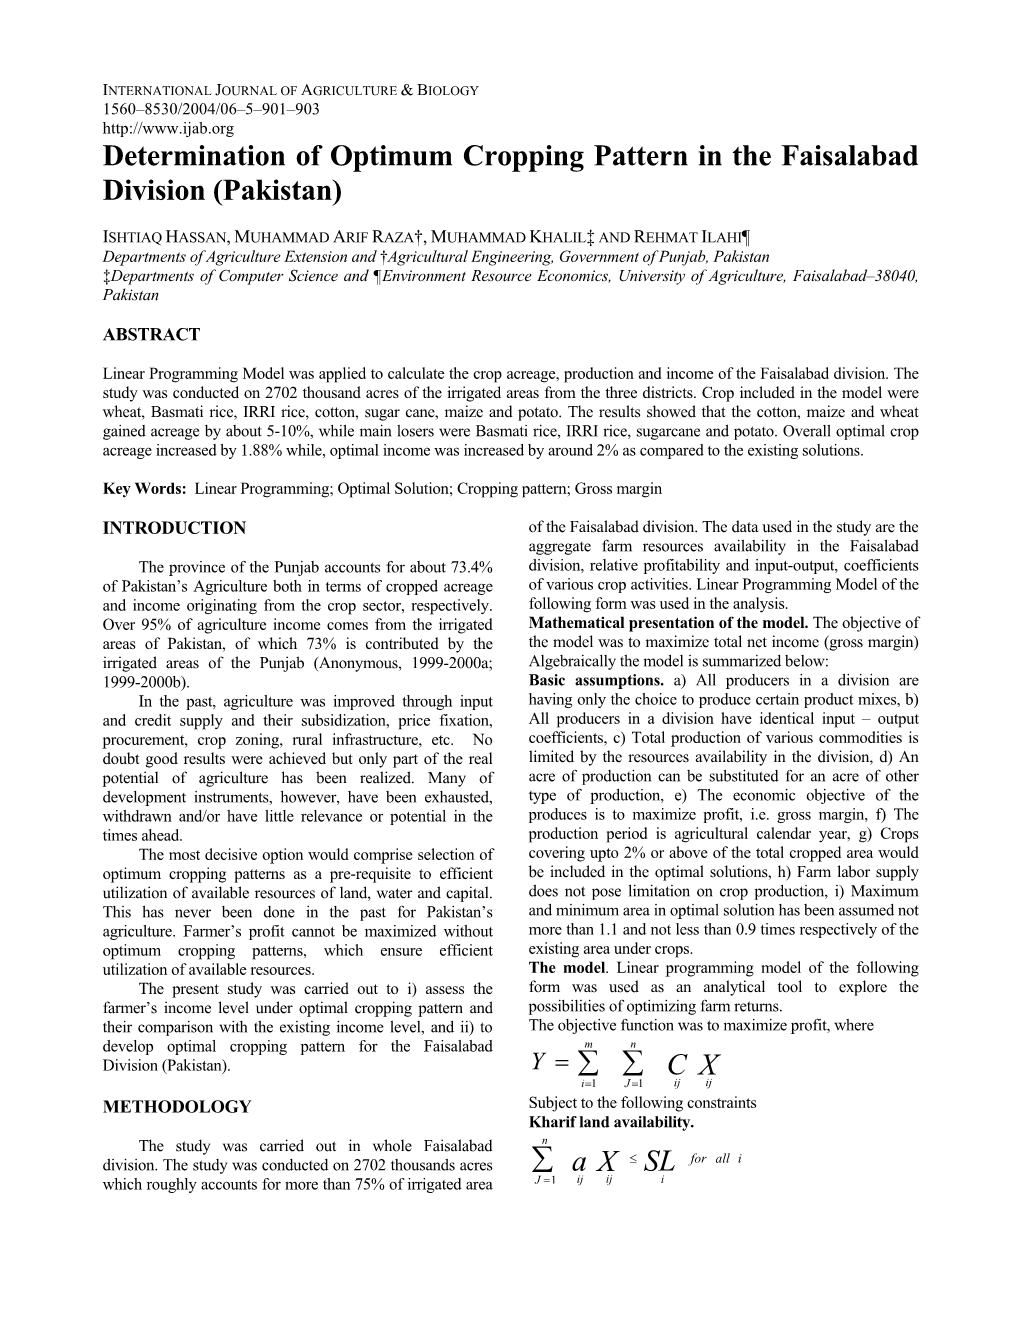 Determination of Optimum Cropping Pattern in the Faisalabad Division (Pakistan)